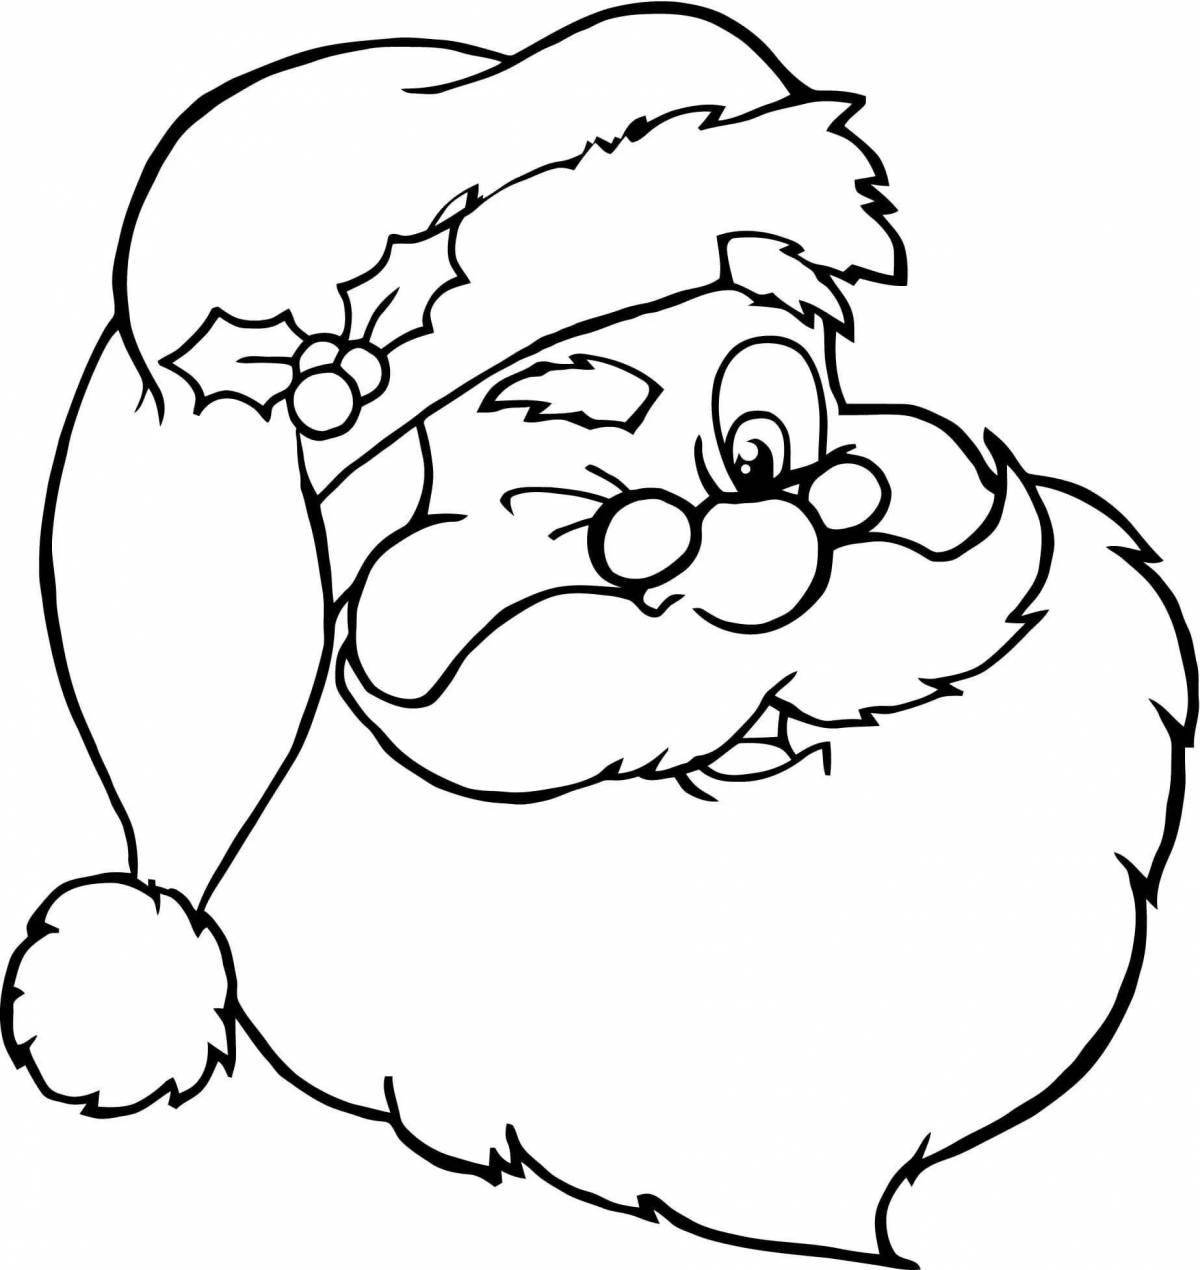 Snuggly coloring page bunny in the hat